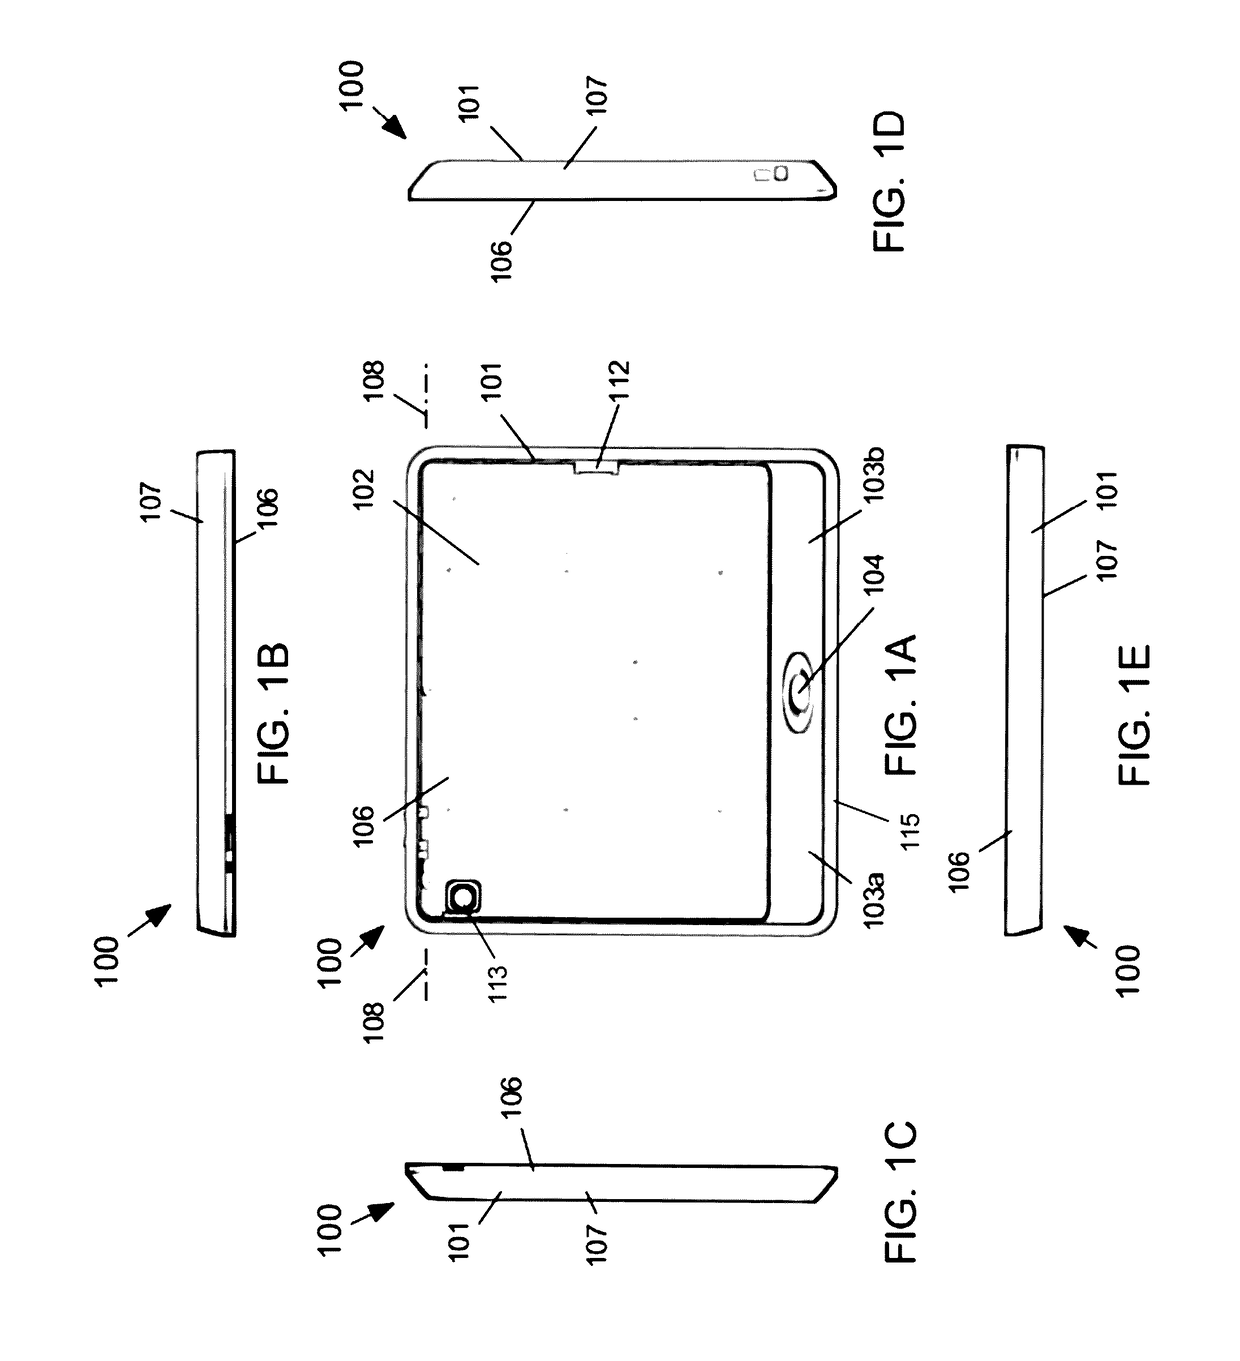 Acoustic layer in media device providing enhanced audio performance